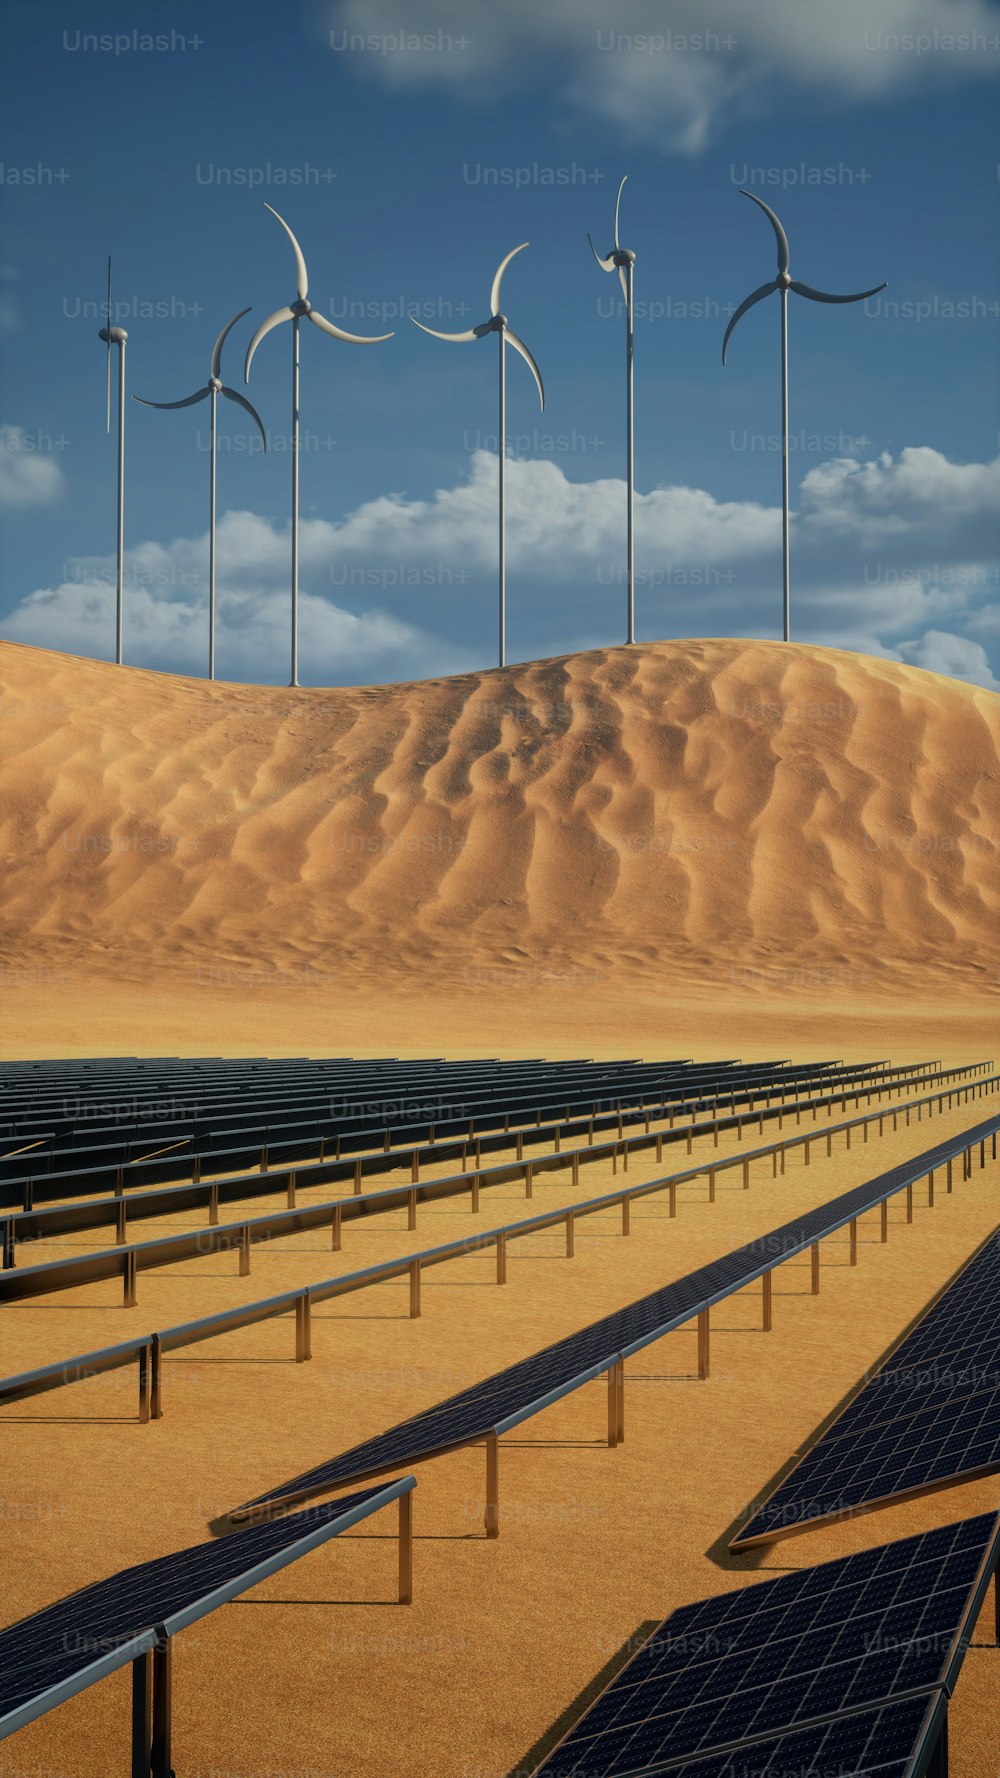 rows of solar panels in a desert with wind turbines